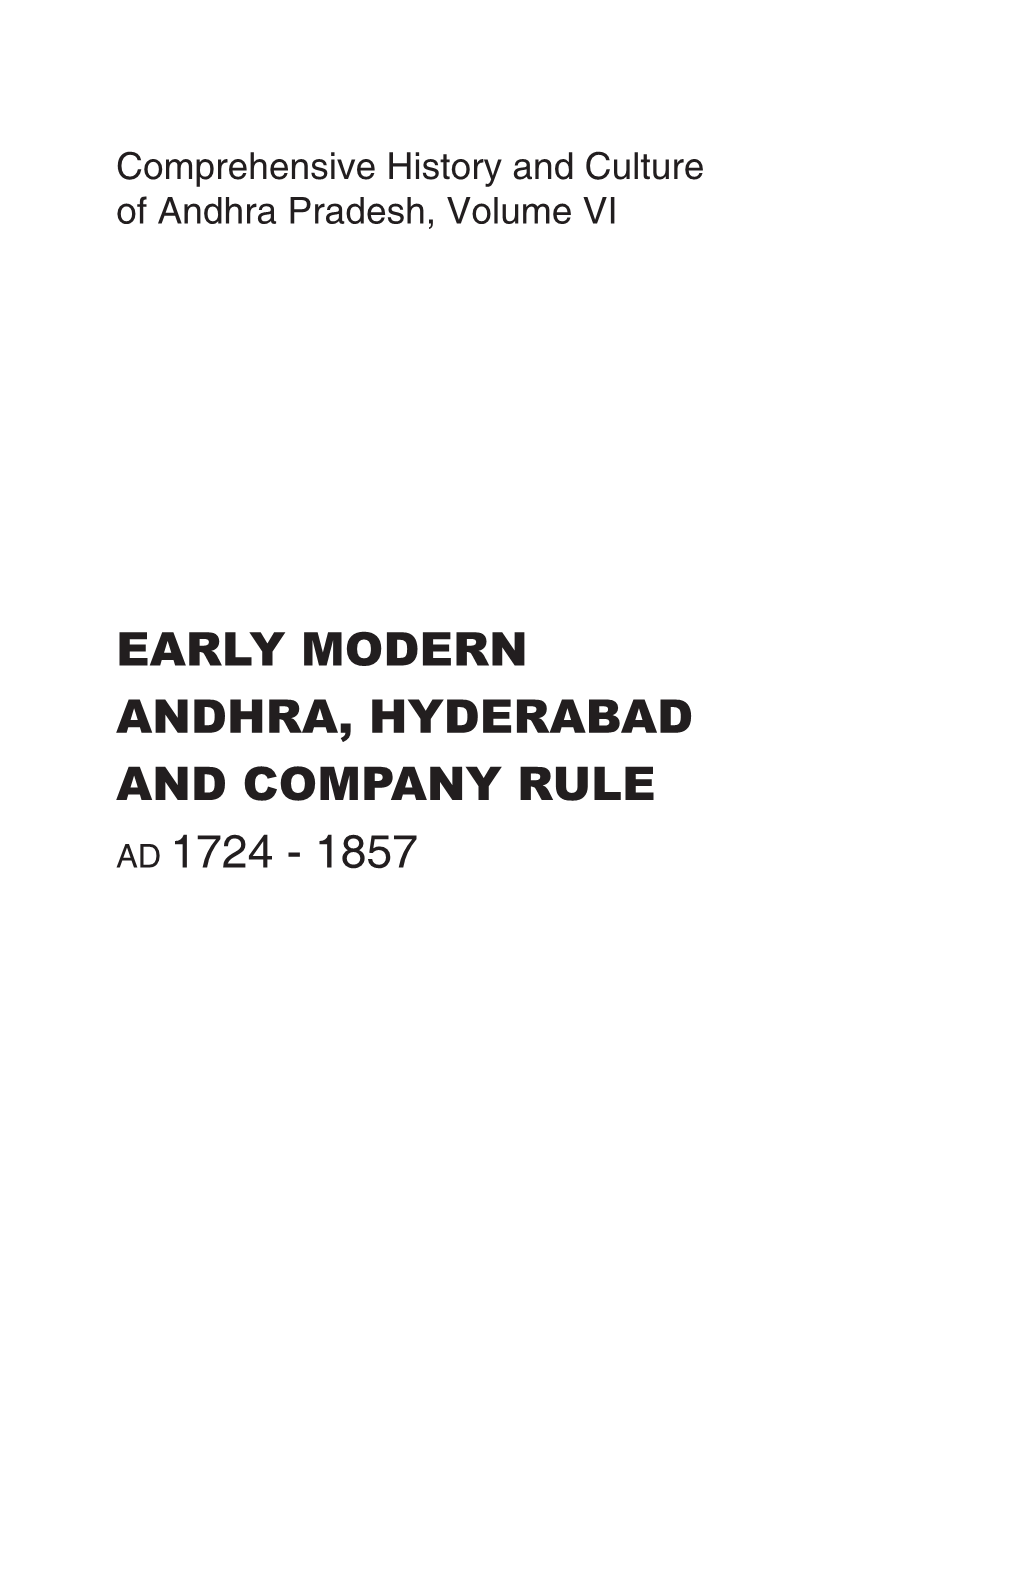 EARLY MODERN ANDHRA, HYDERABAD and COMPANY RULE AD 1724 - 1857 Contants